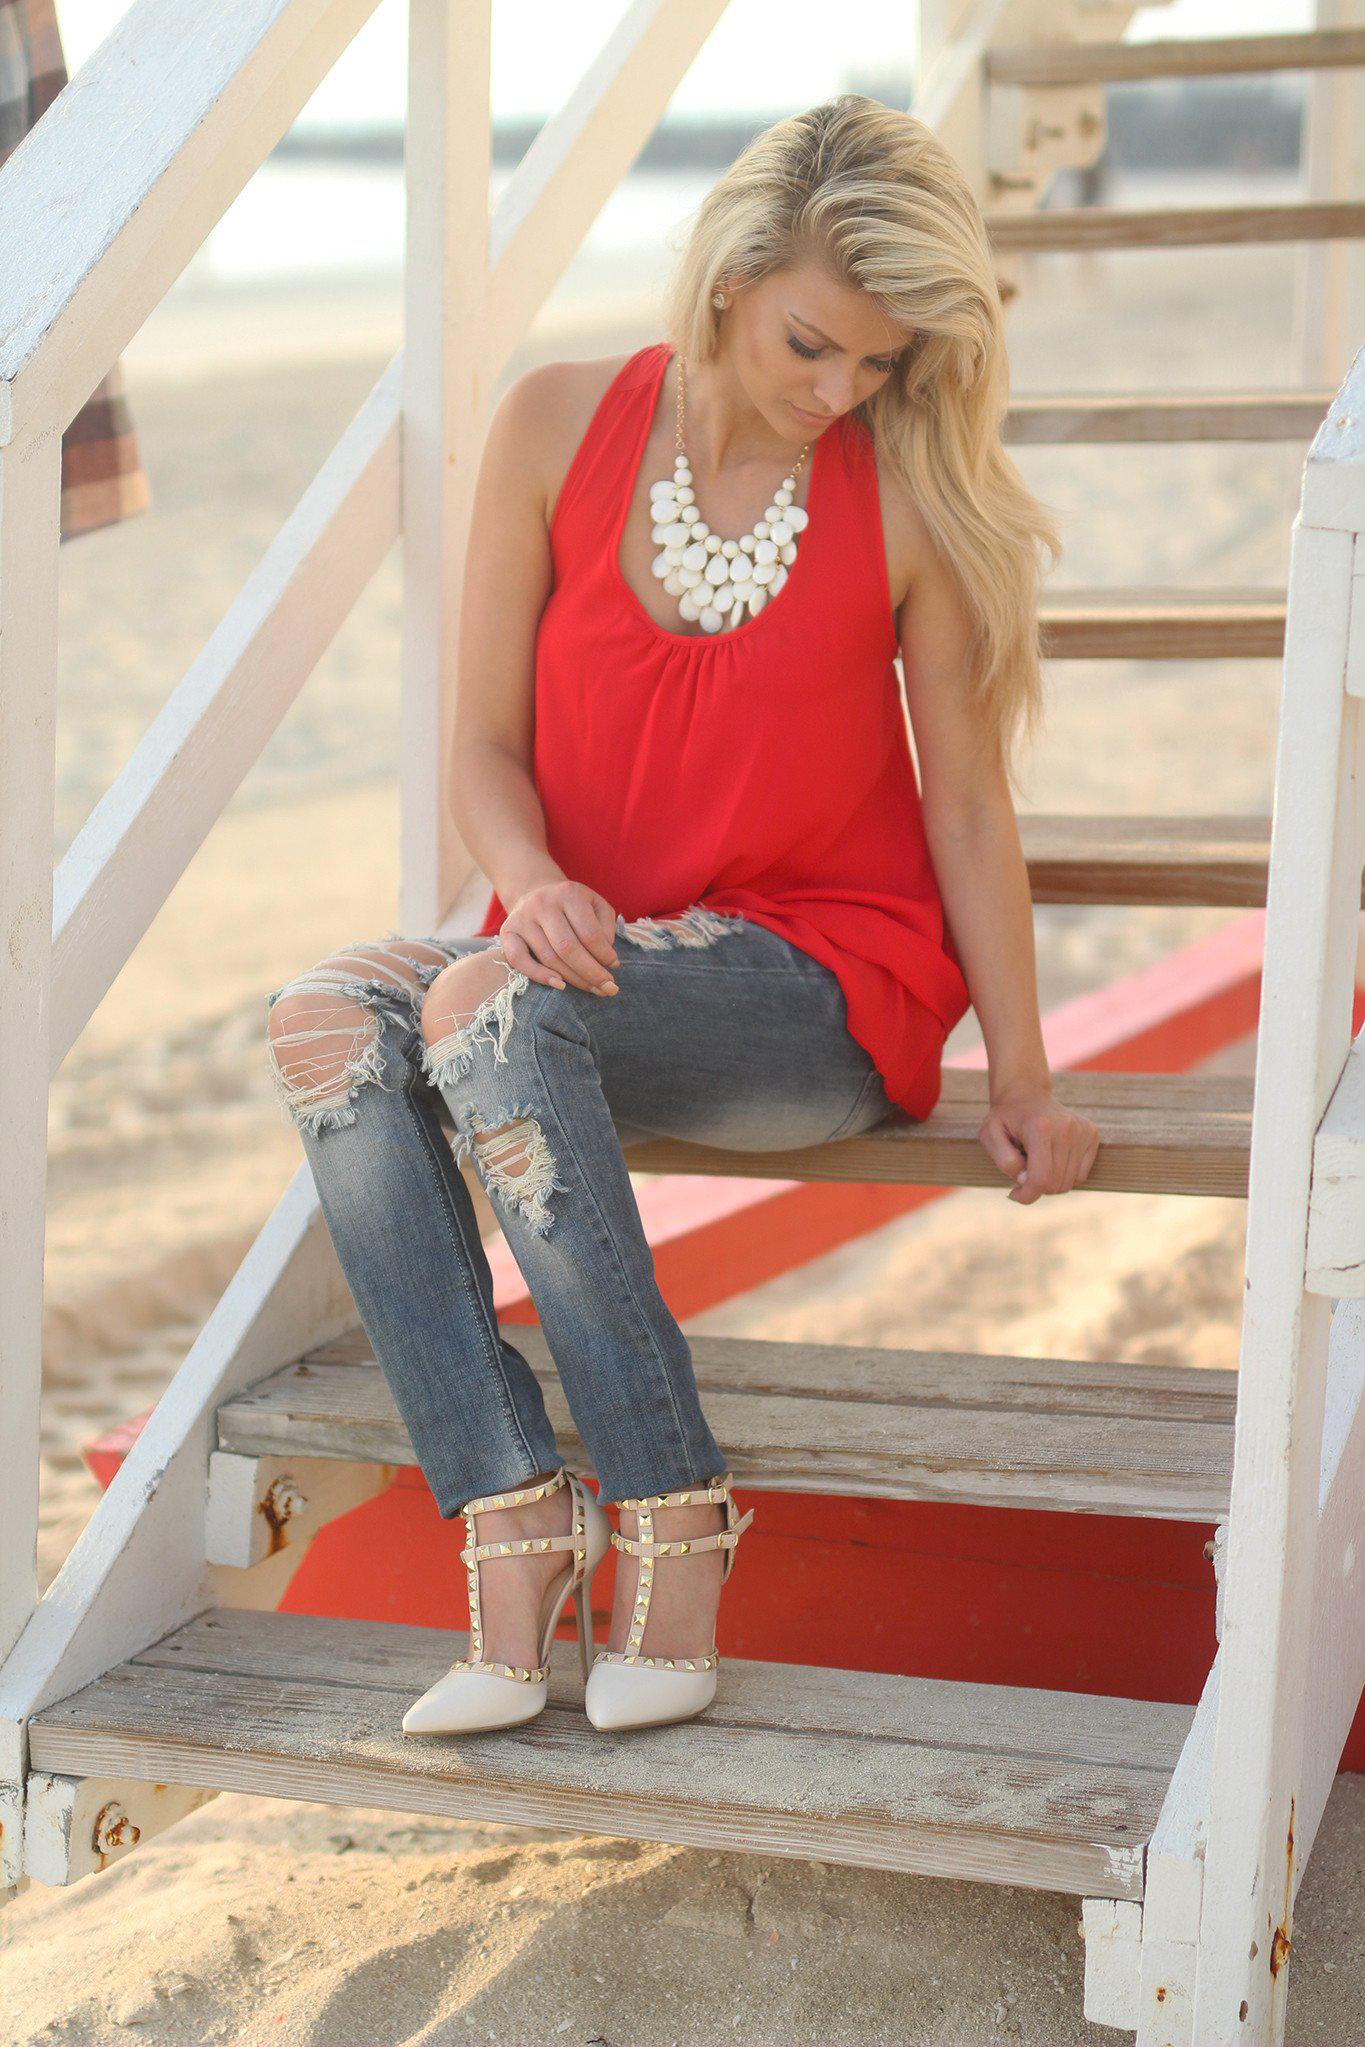 Red Top with Ruffle Racer Back